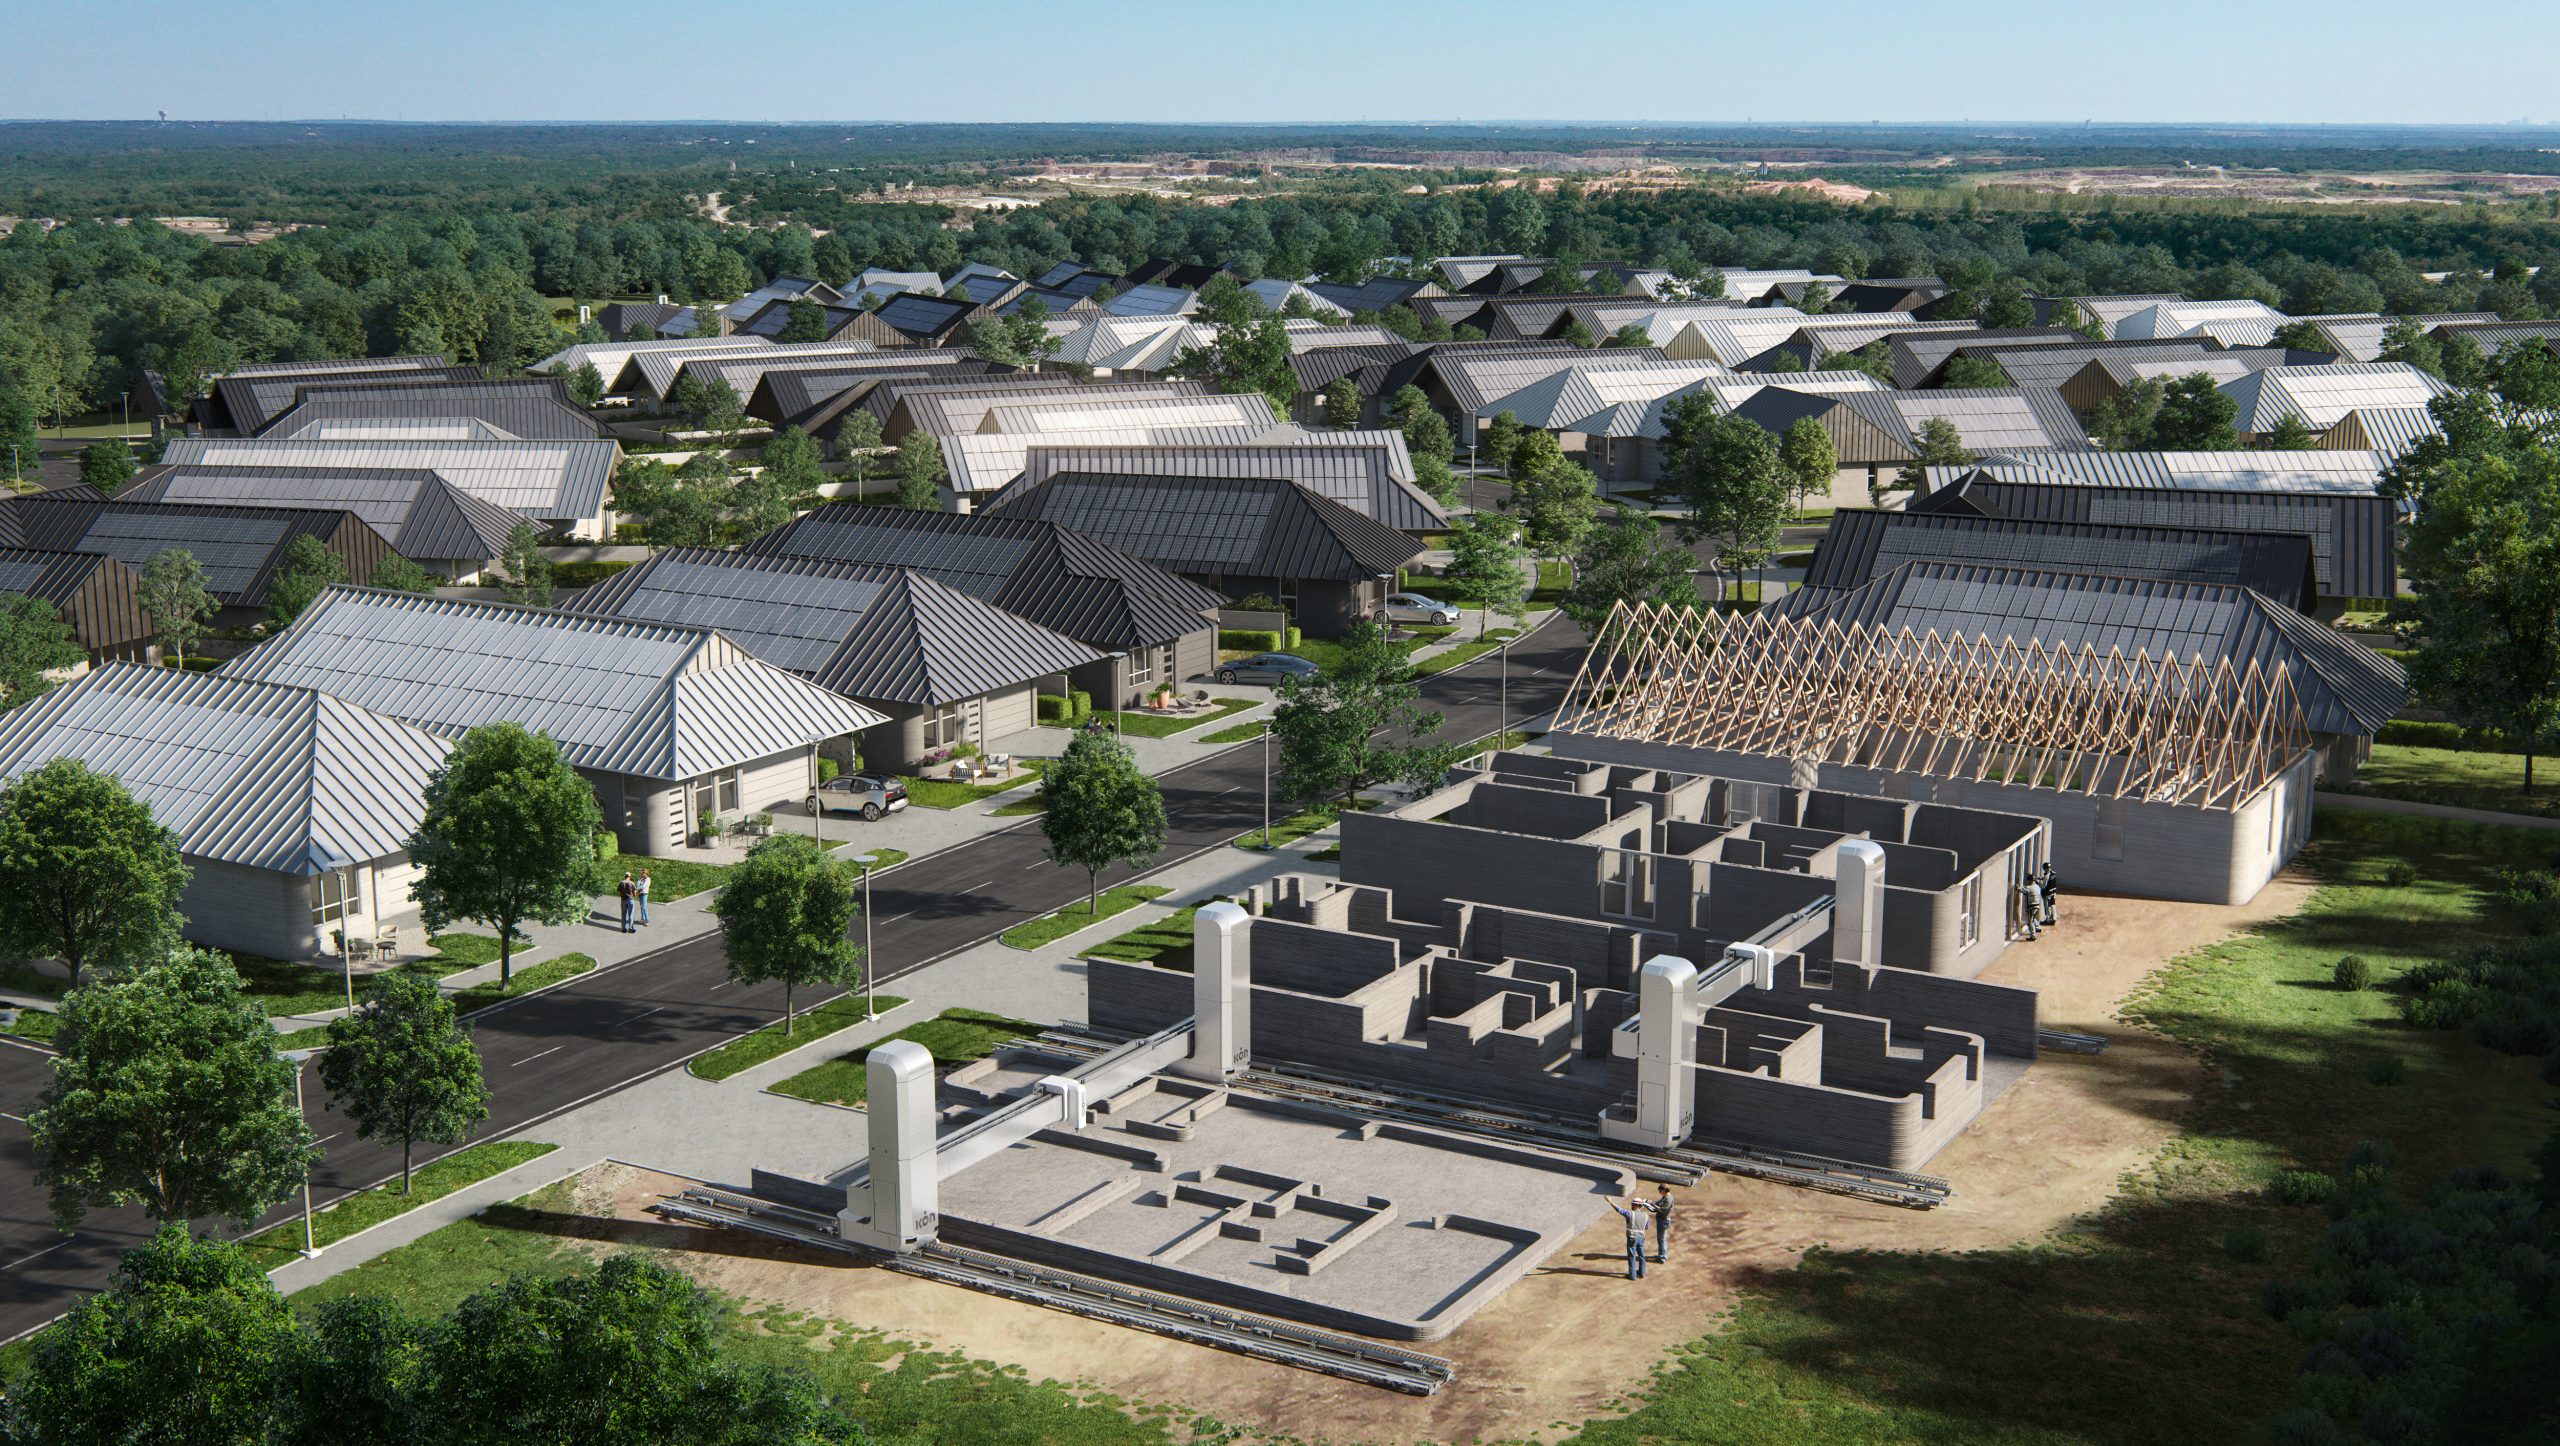 A render of what the 100-home community will look like during construction. Image via ICON.